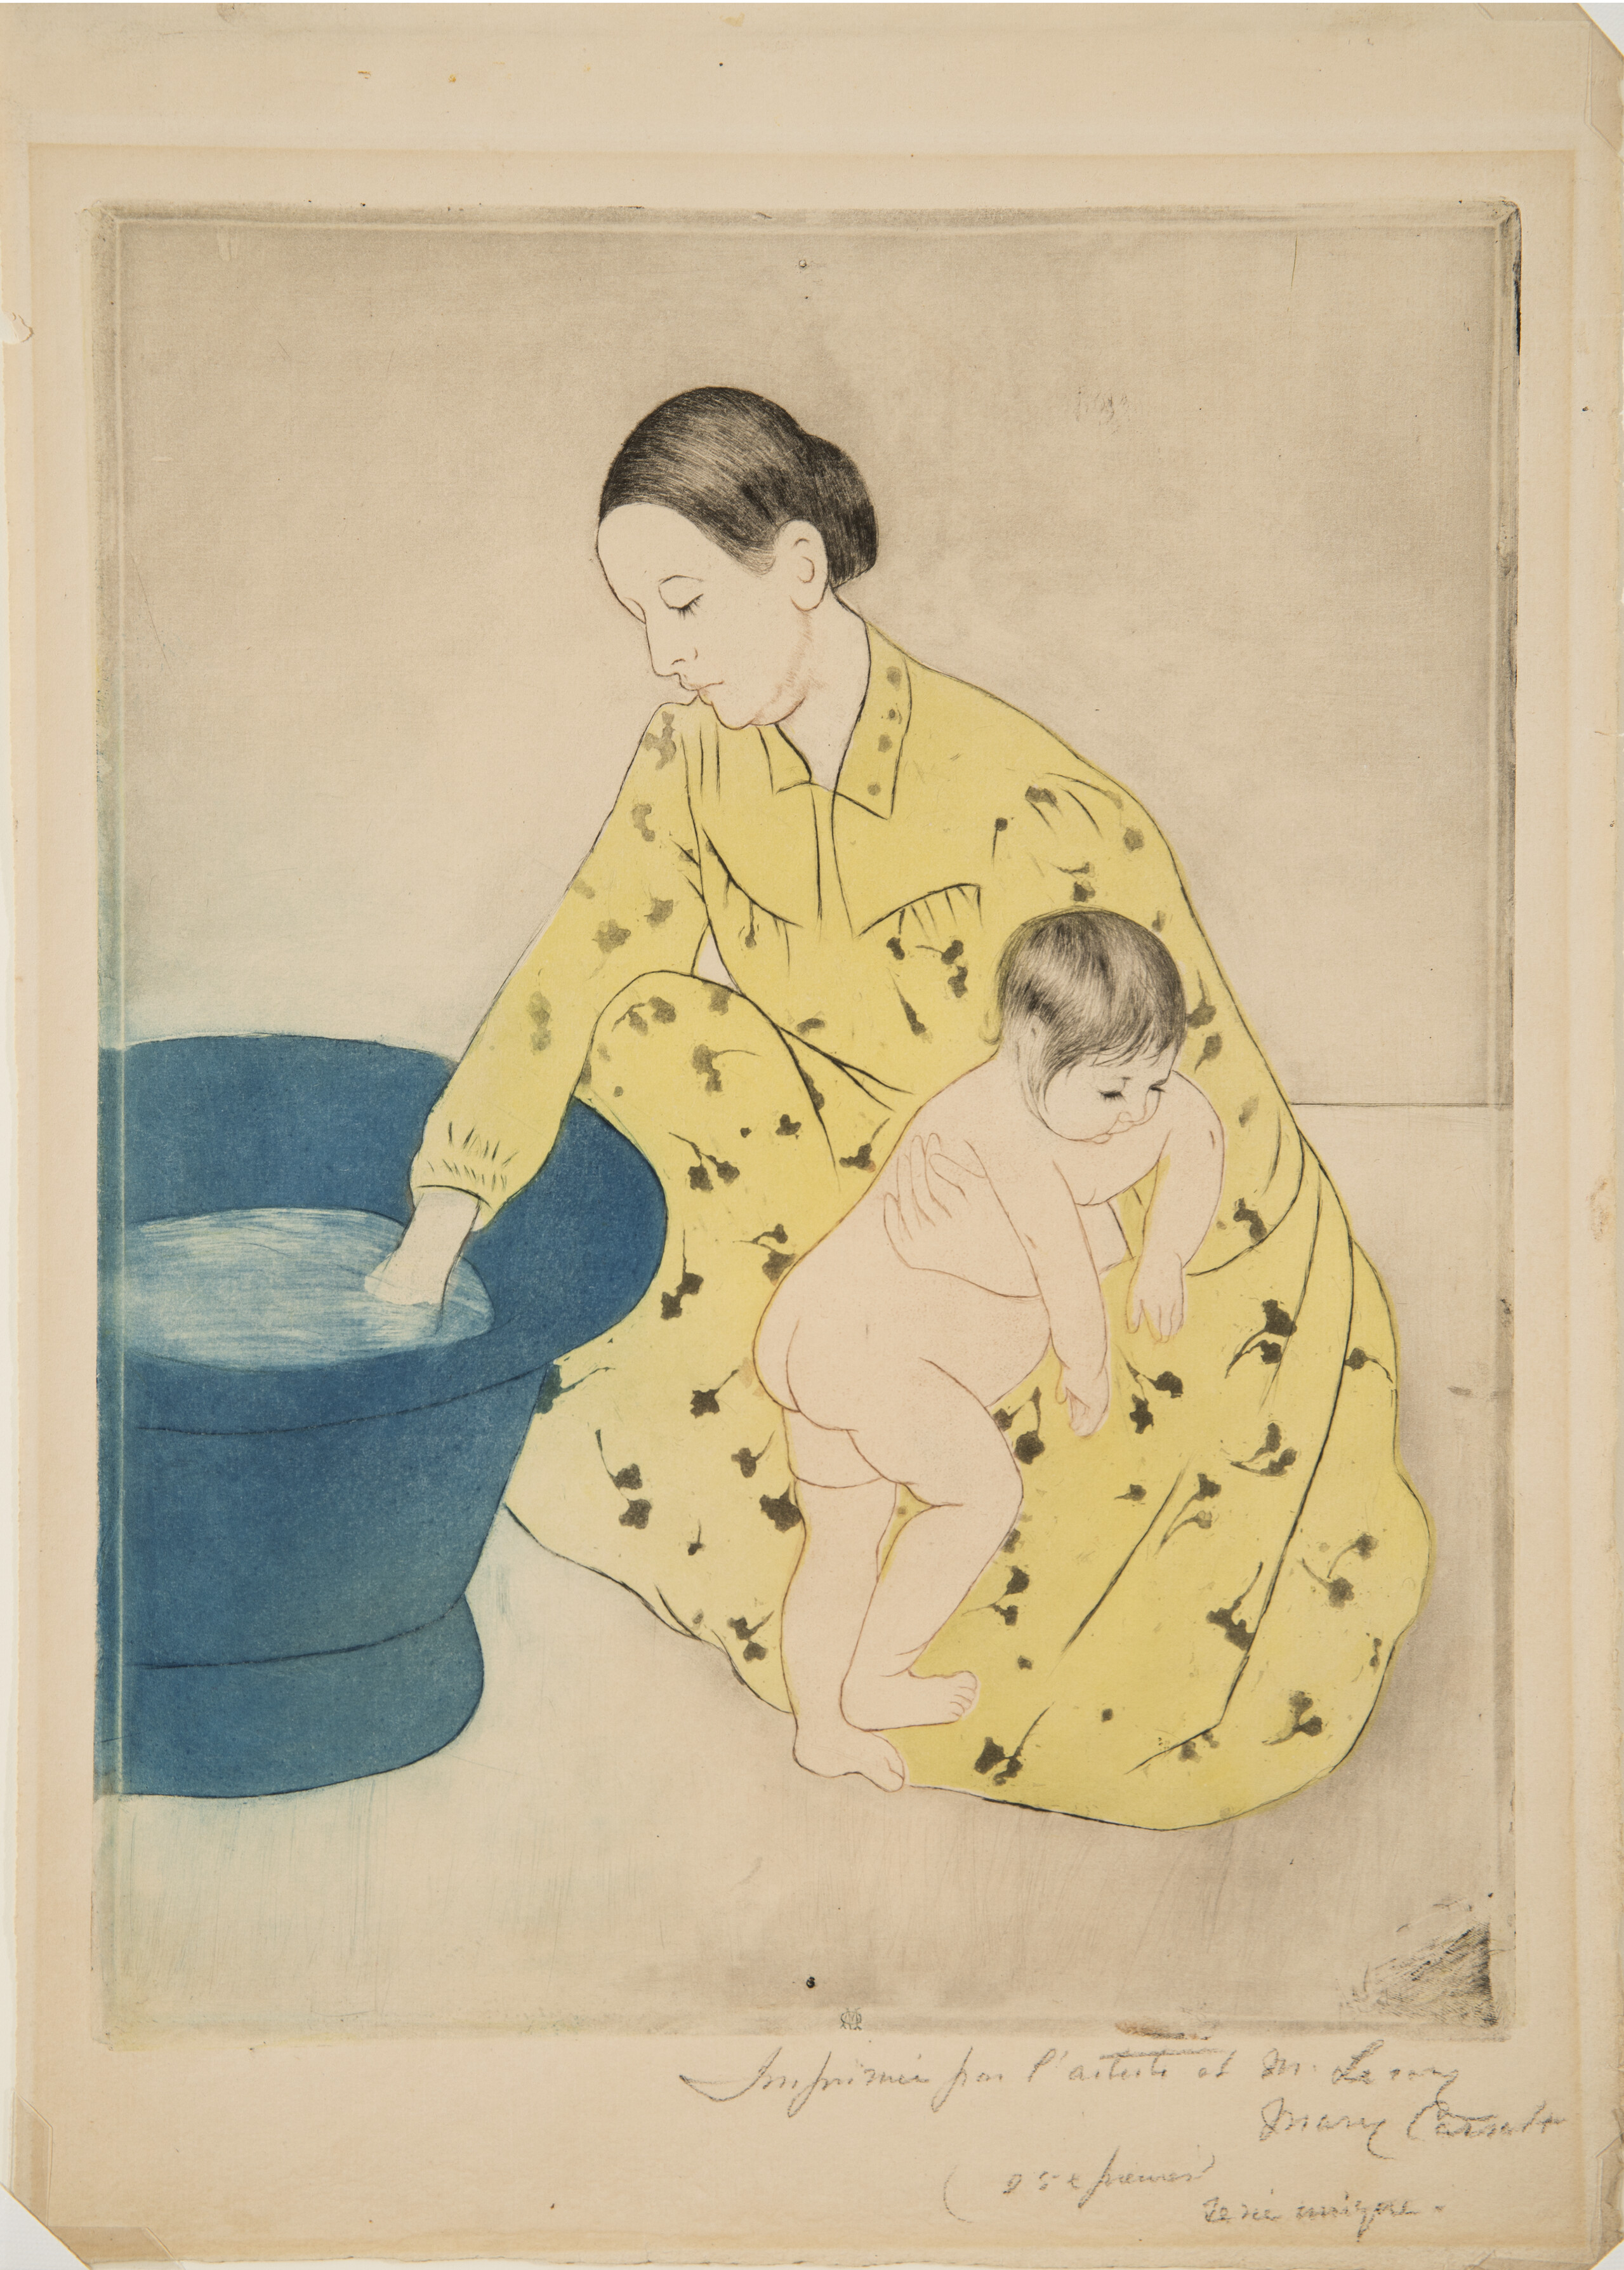 A print shows a dark-haired, light-skinned woman wearing a yellow dress and kneeling near a blue tub. Her right hand tests the water, and her left gently restrains a naked child who faces the opposite direction as if squirming away. Minimal shading flattens the space they occupy.